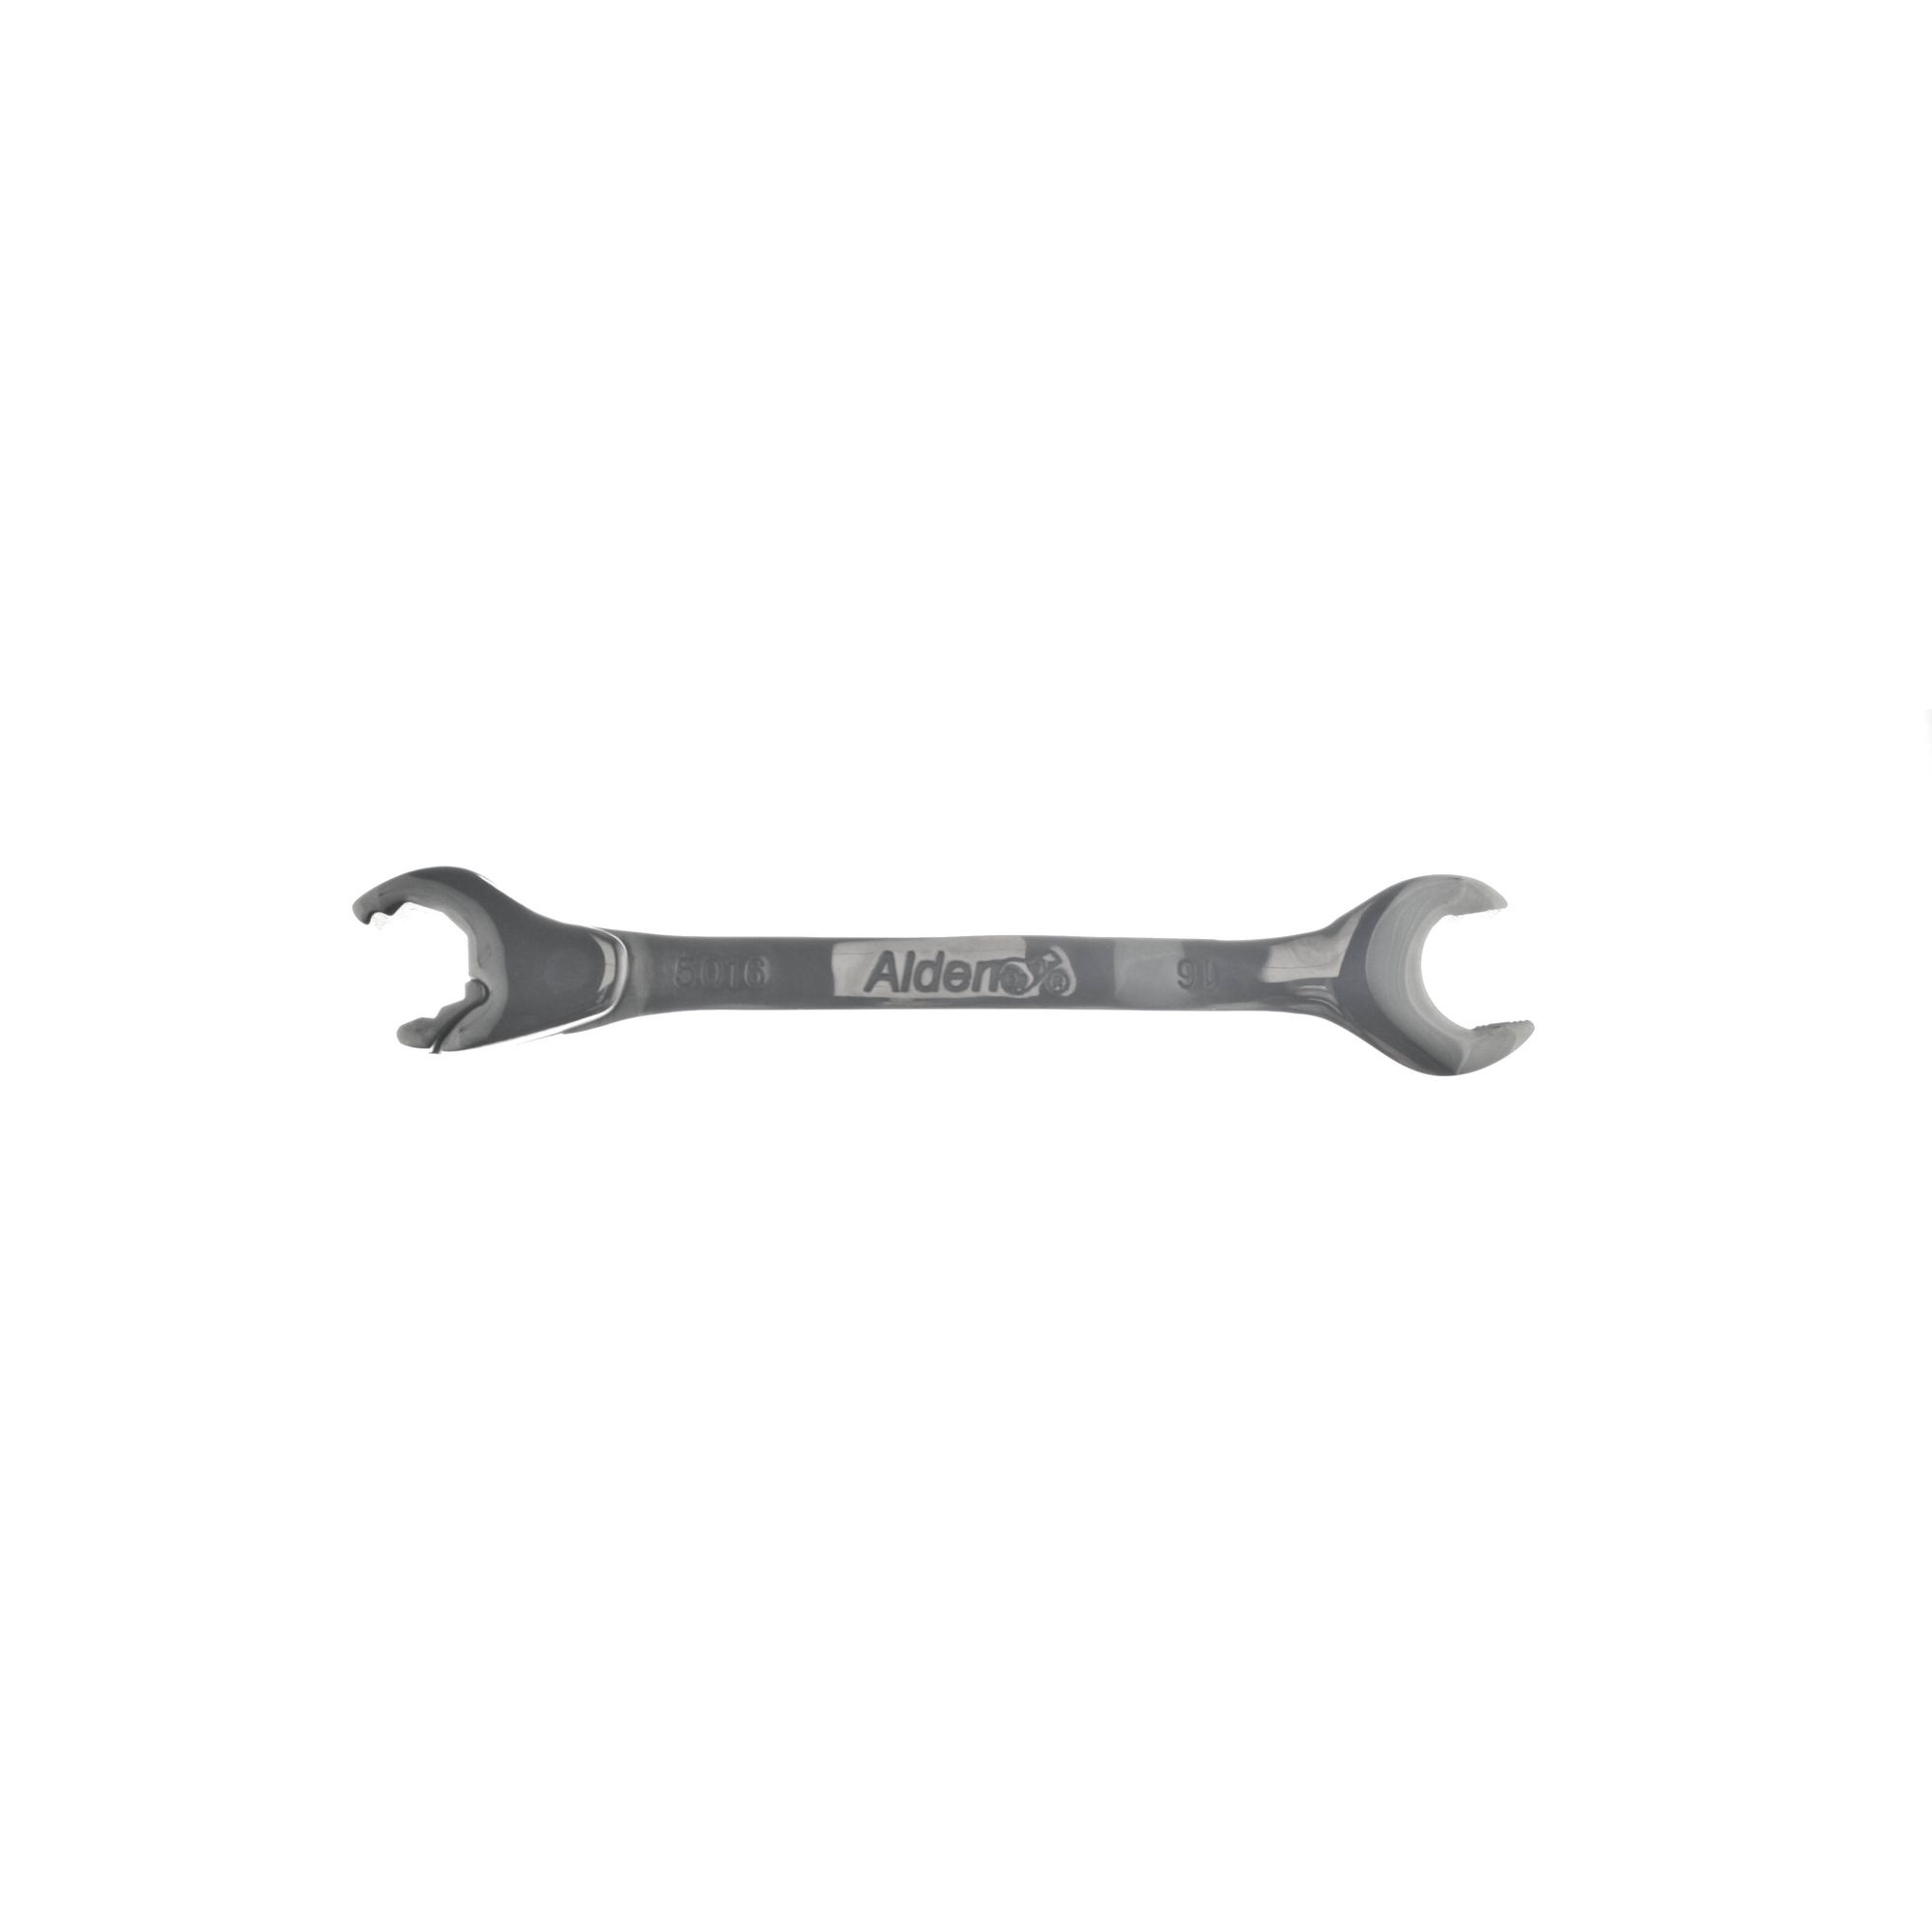 Chicago Brand 16mm Open-End Ratchet Wrench